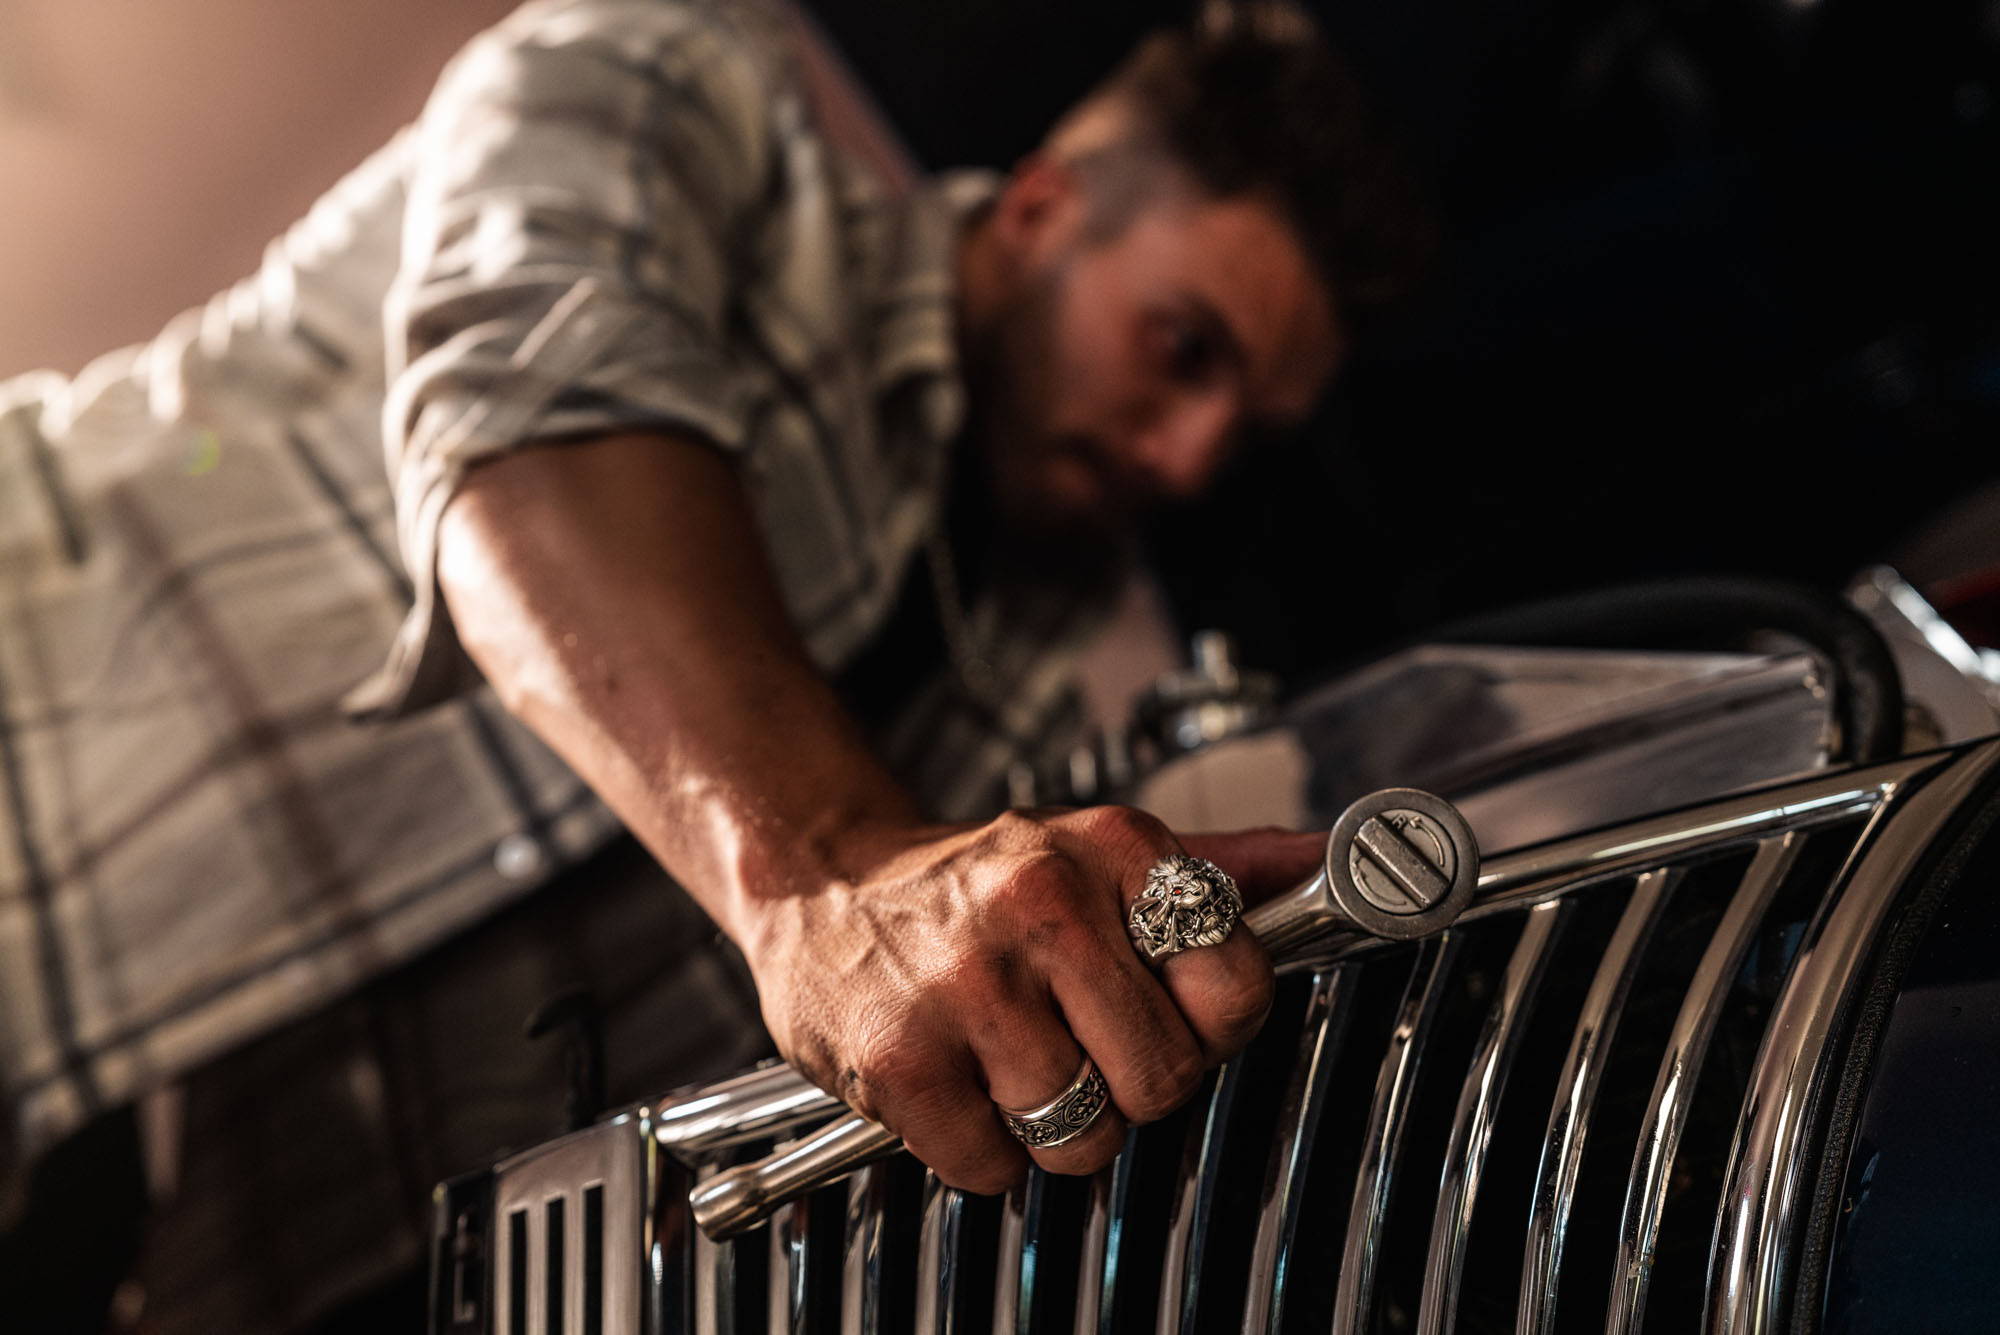 A man wearing a Rudiarius Band working under the hood of a classic car